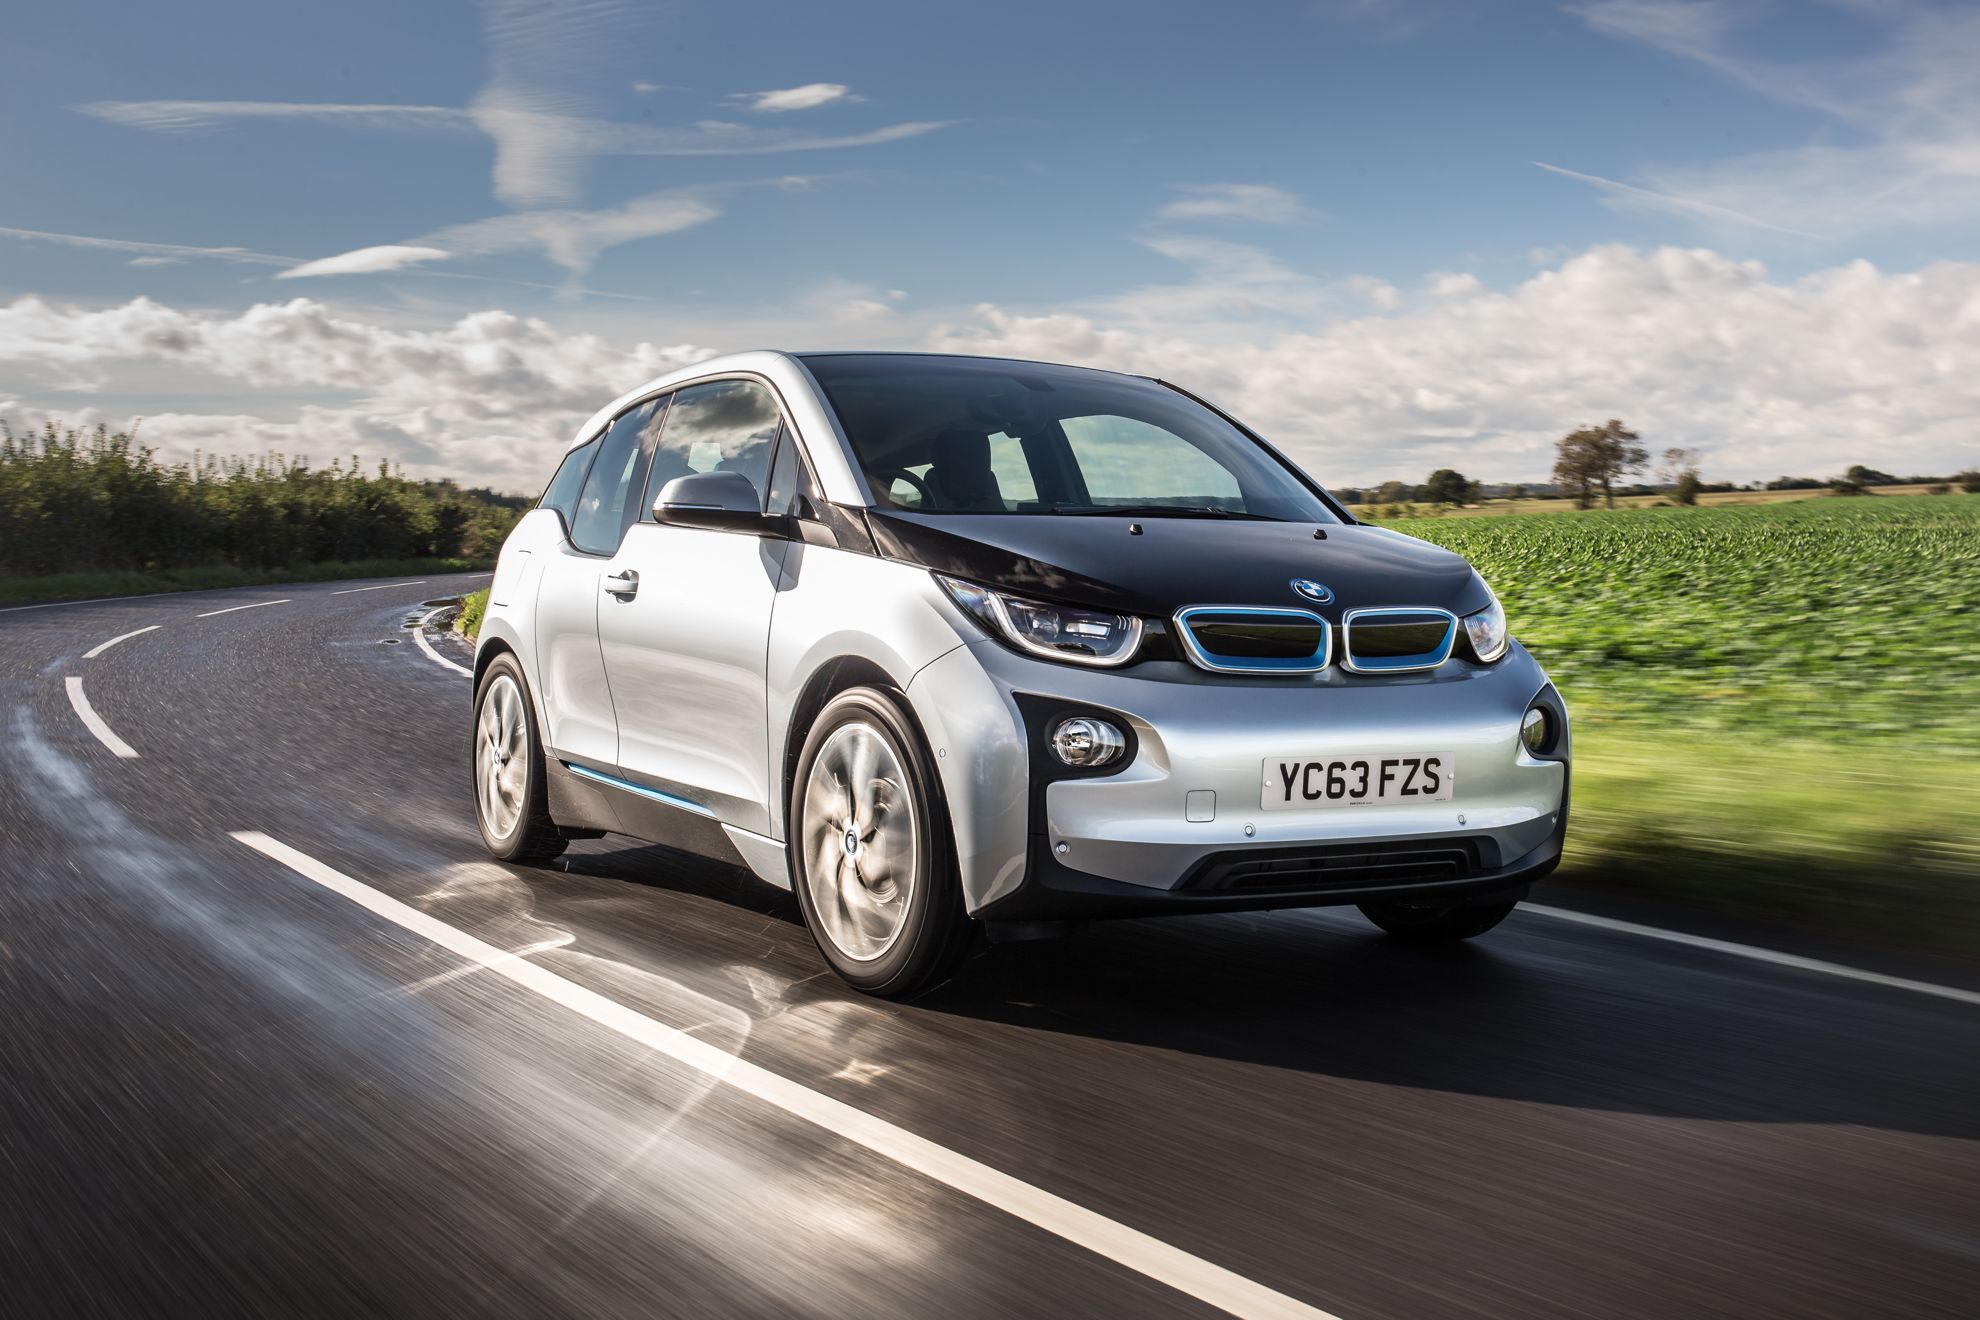 BMW i seals partnership deal with Good Energy for Green Electricity supply in the UK